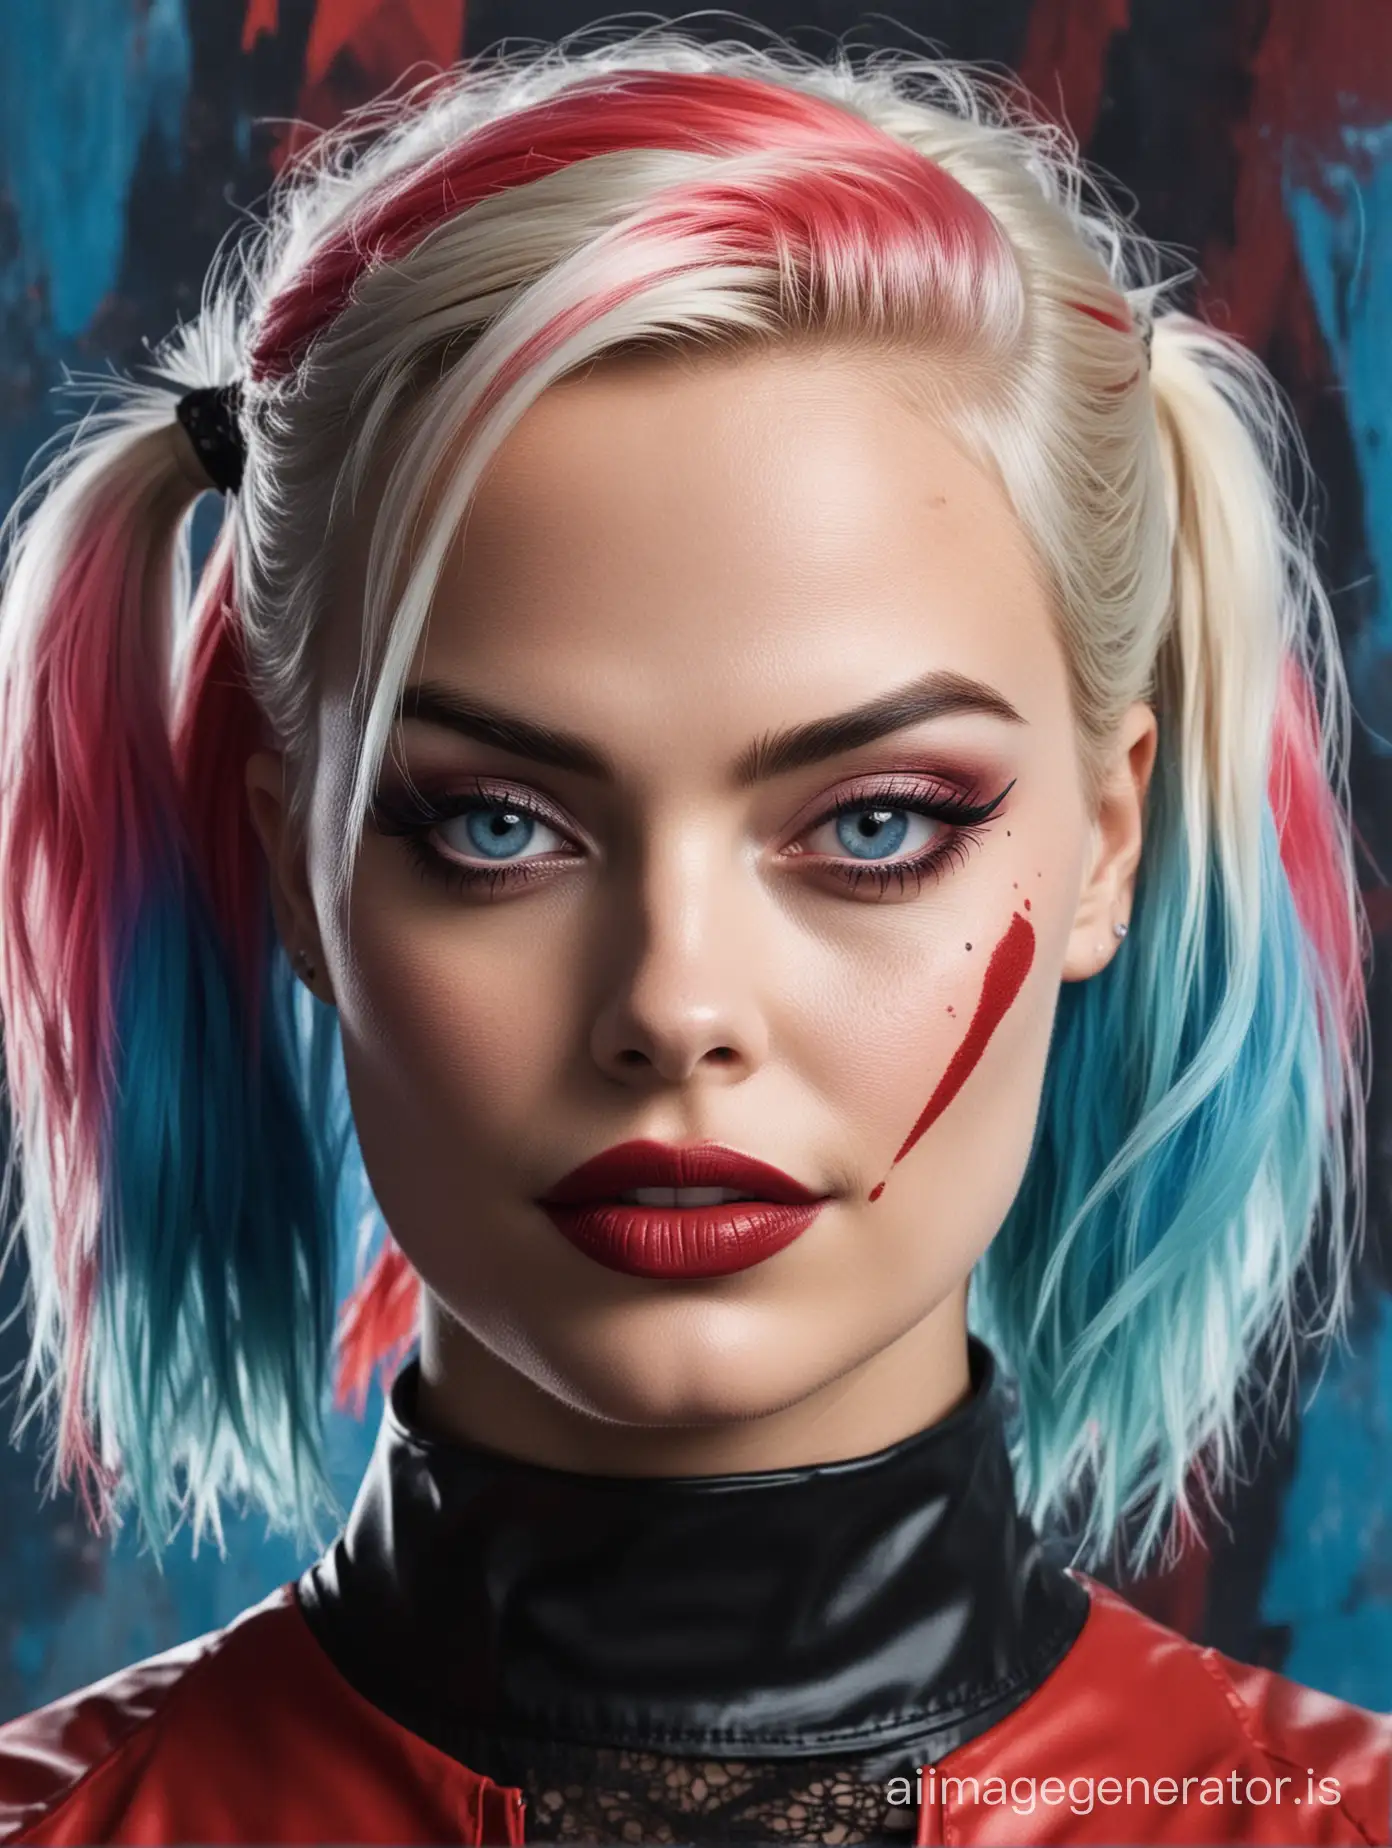 Margot-Robbie-as-Harley-Quinn-with-RedBlue-Hair-Abstract-Portrait